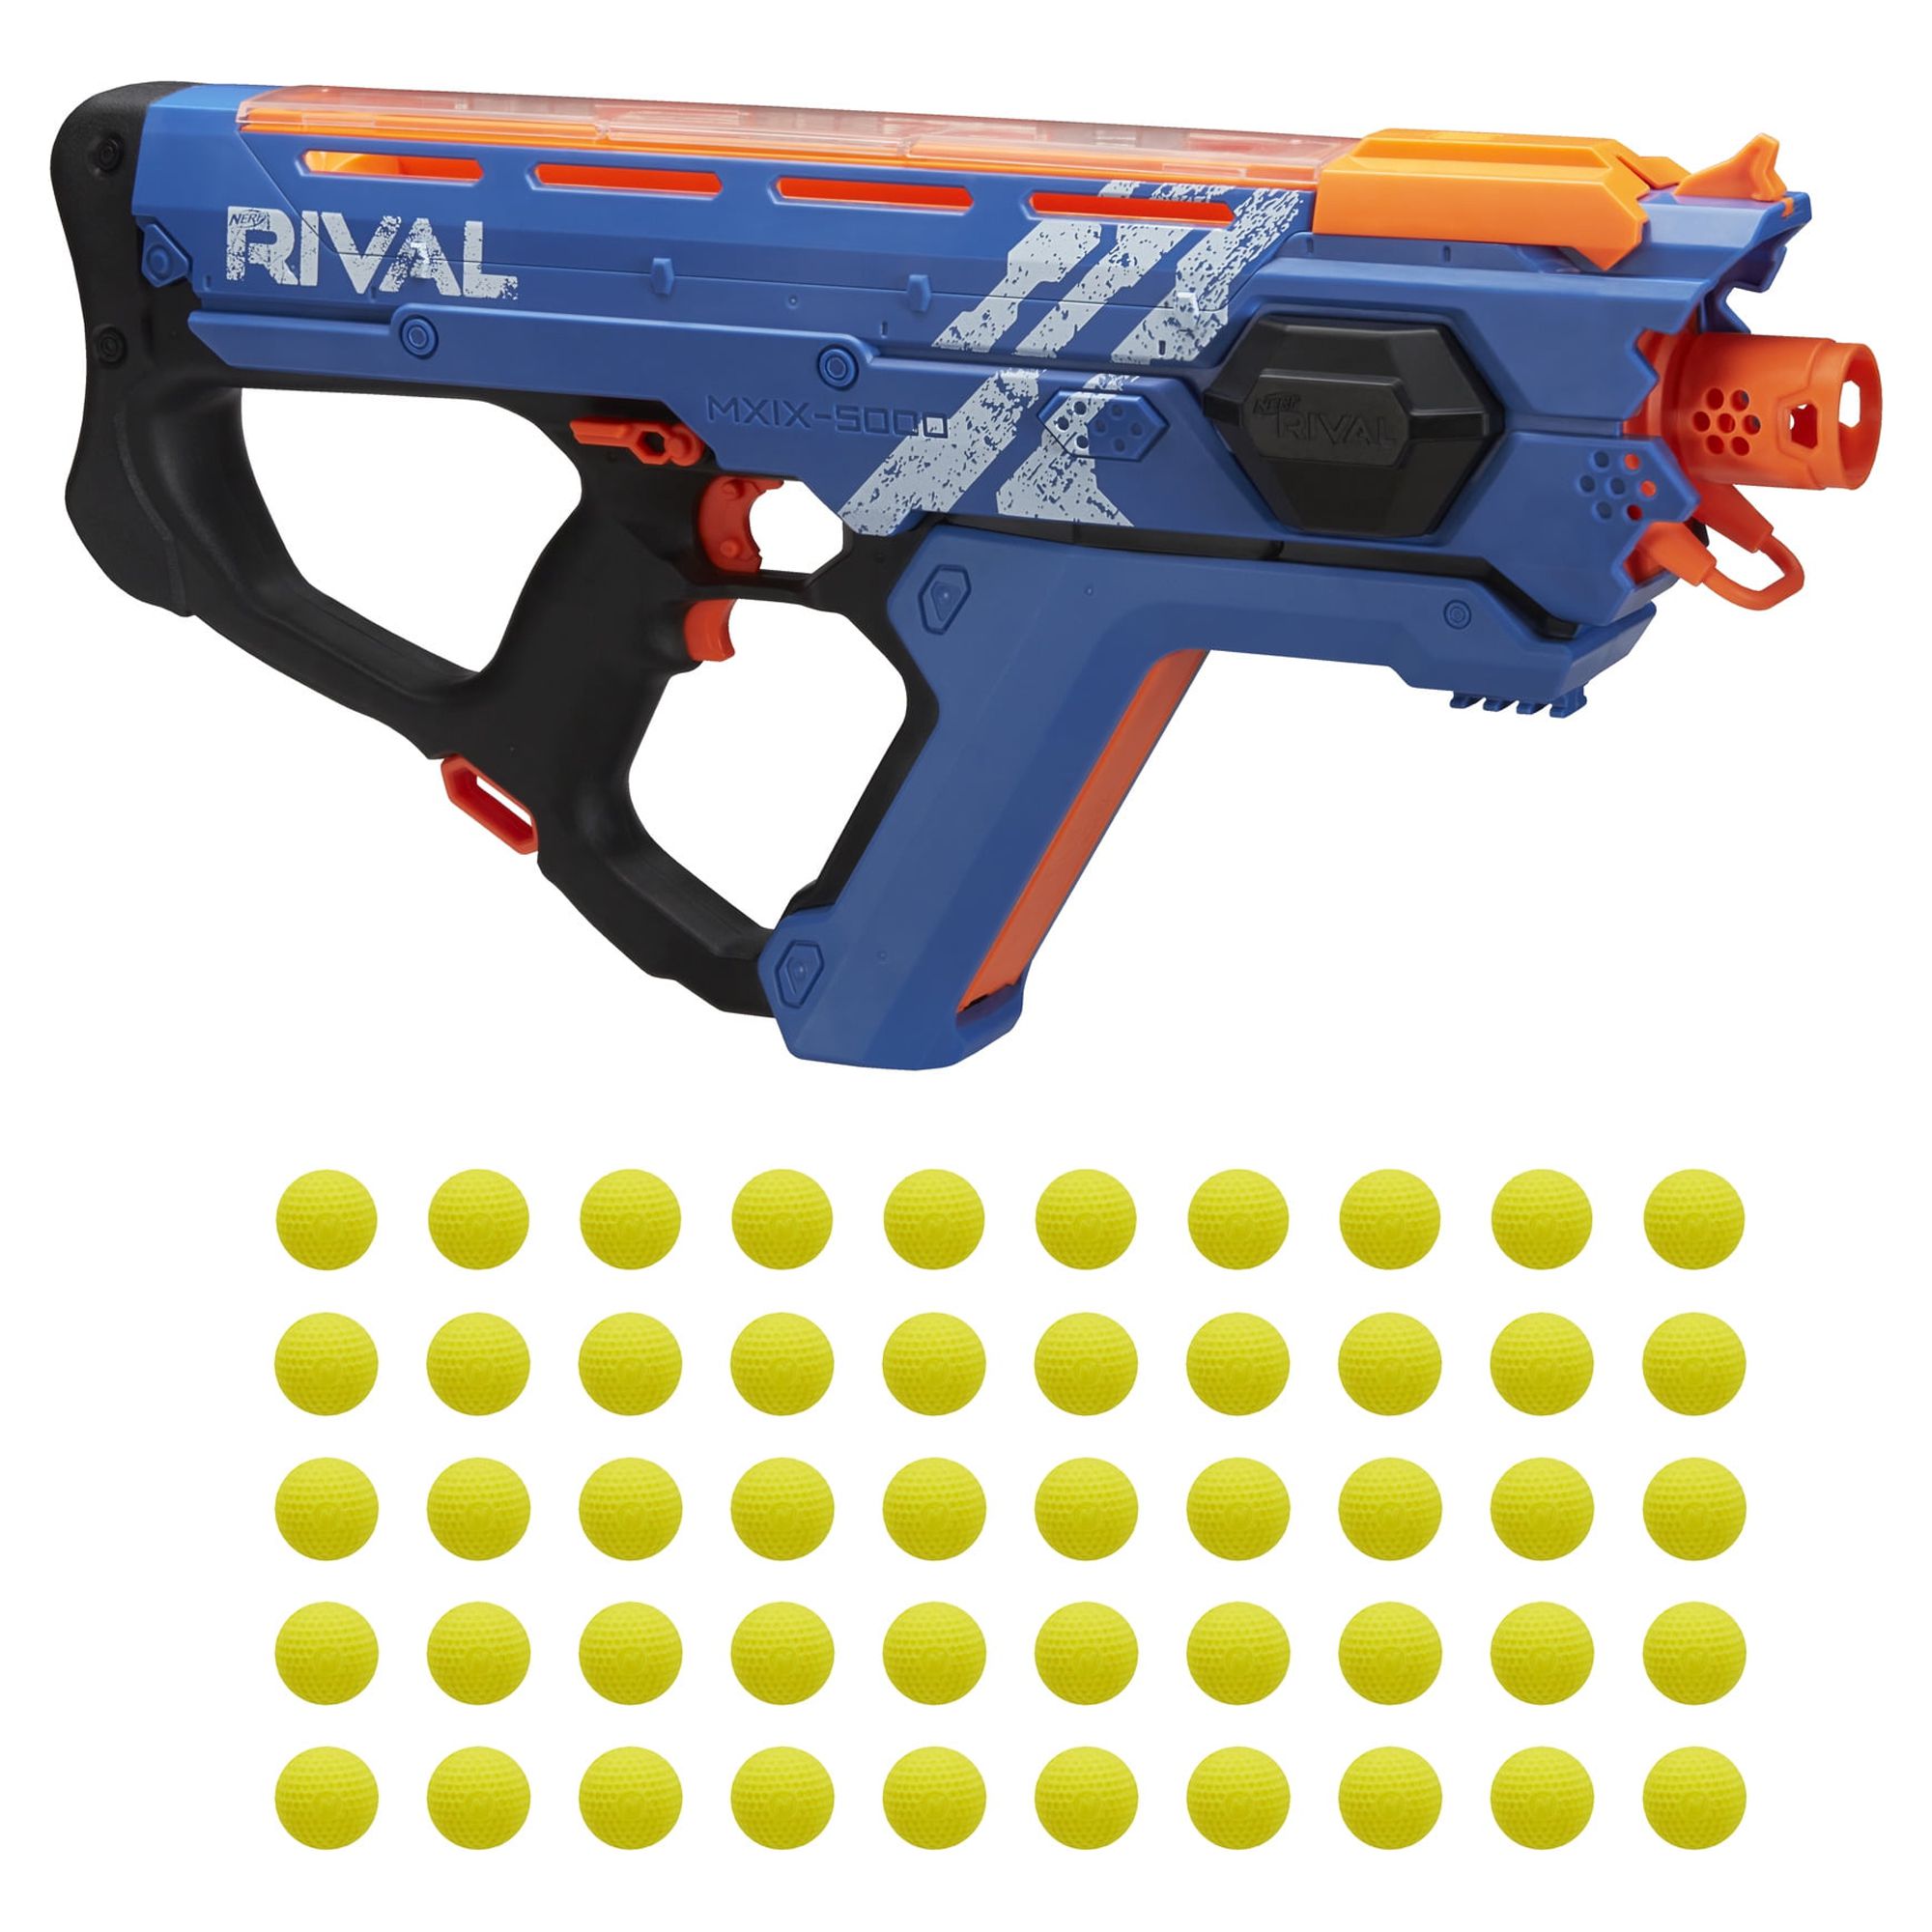 Nerf Rival Perses MXIX-5000 Team Blue Motorized Kids Toy Blaster with 50 Ball Dart Rounds for Ages 14 and Up - image 1 of 8